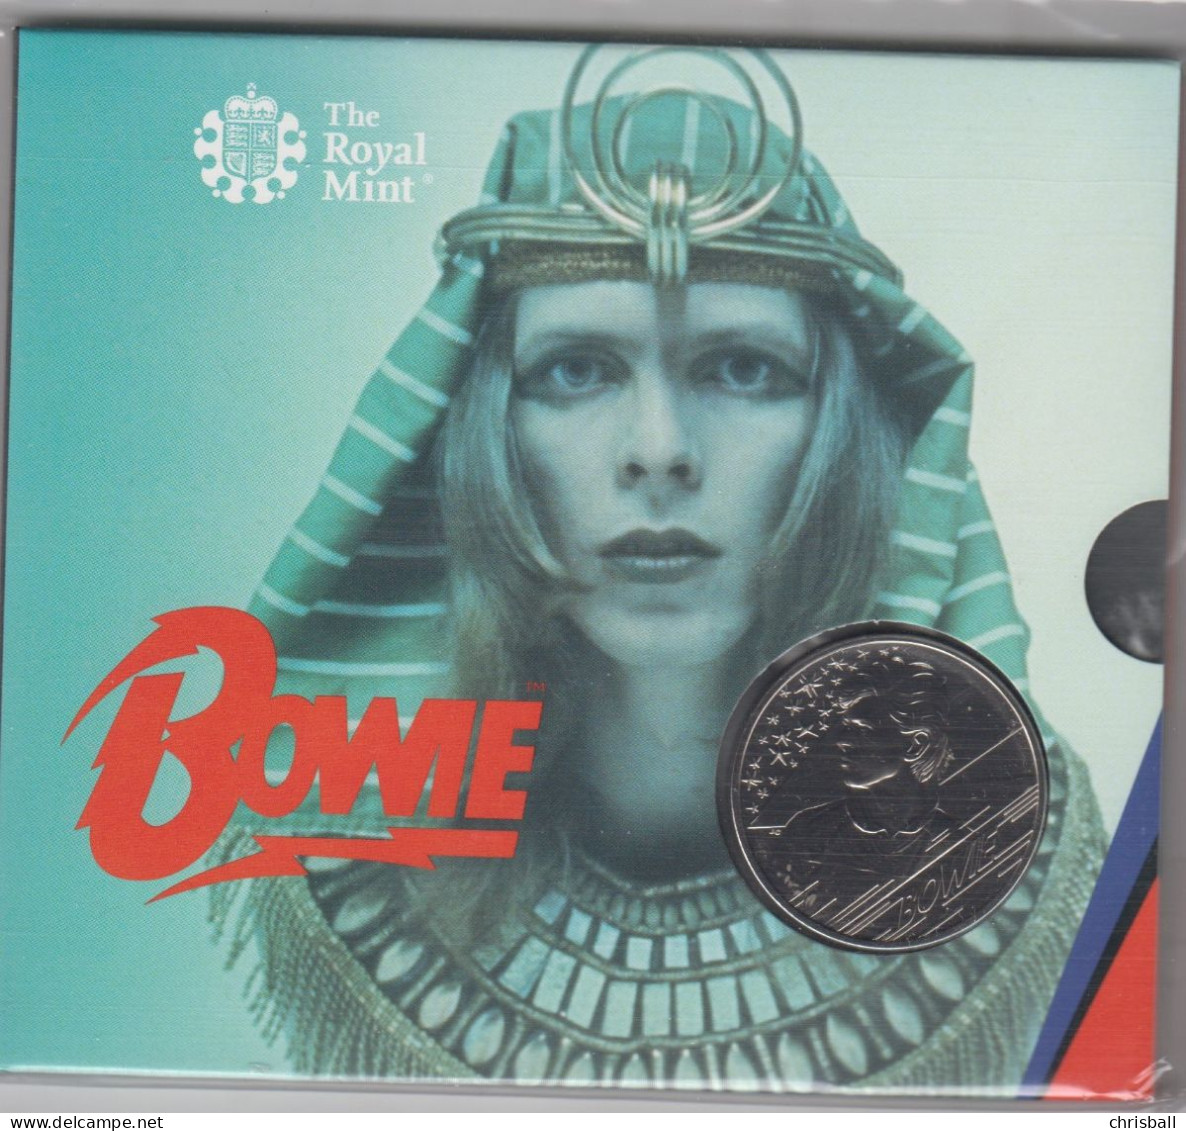 Great Britain UK £5 Five Pound Coin David Bowie - 2020 Royal Mint Pack - 5 Pond